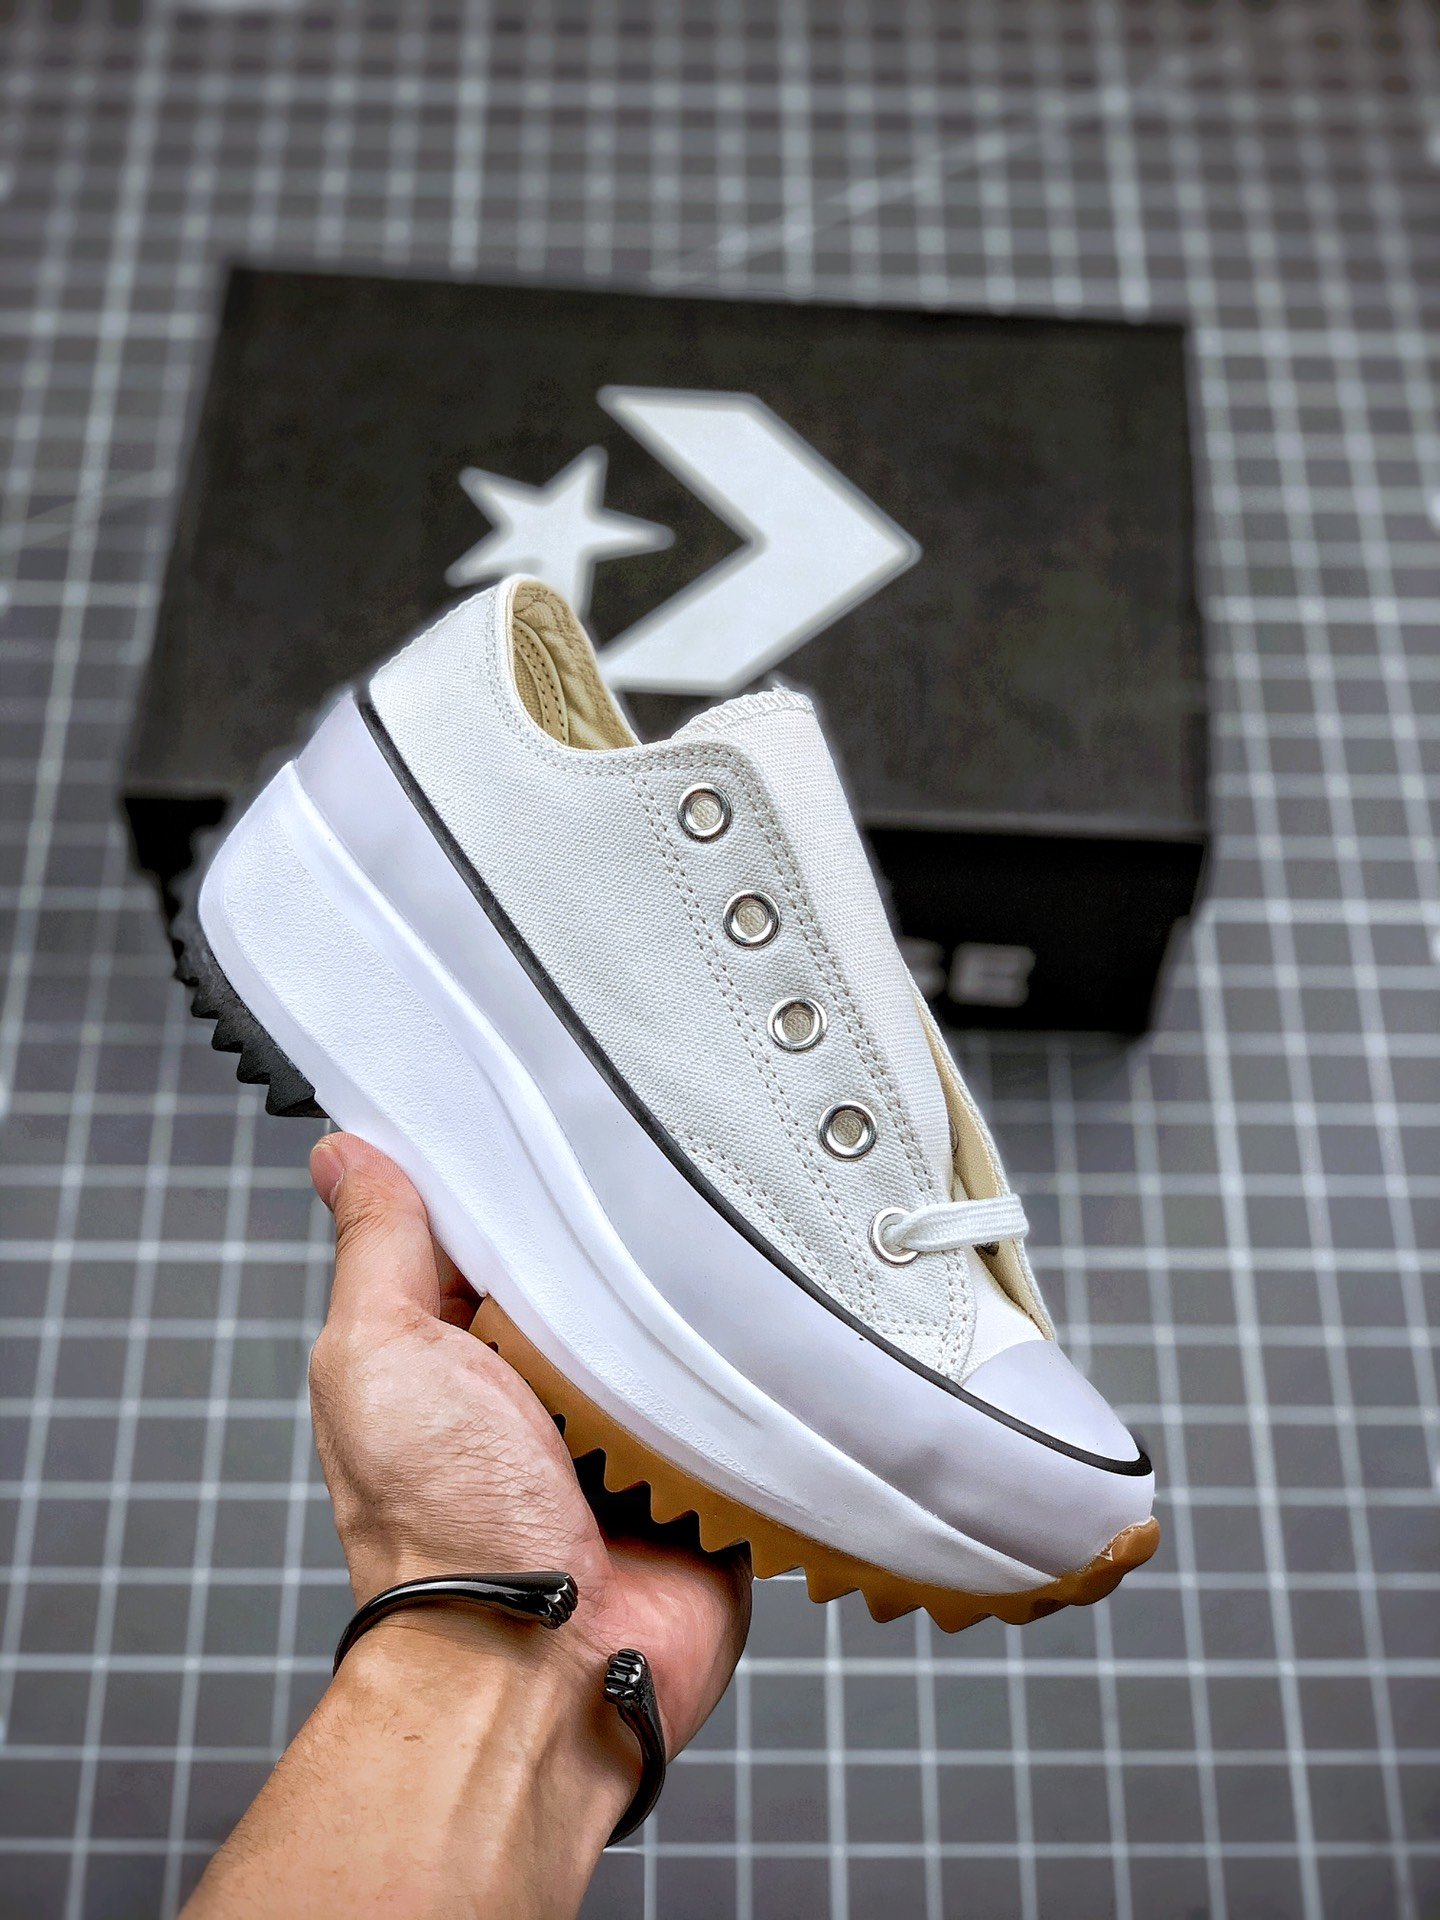 Converse Run Star Hike Low Top White 168817C Shoes